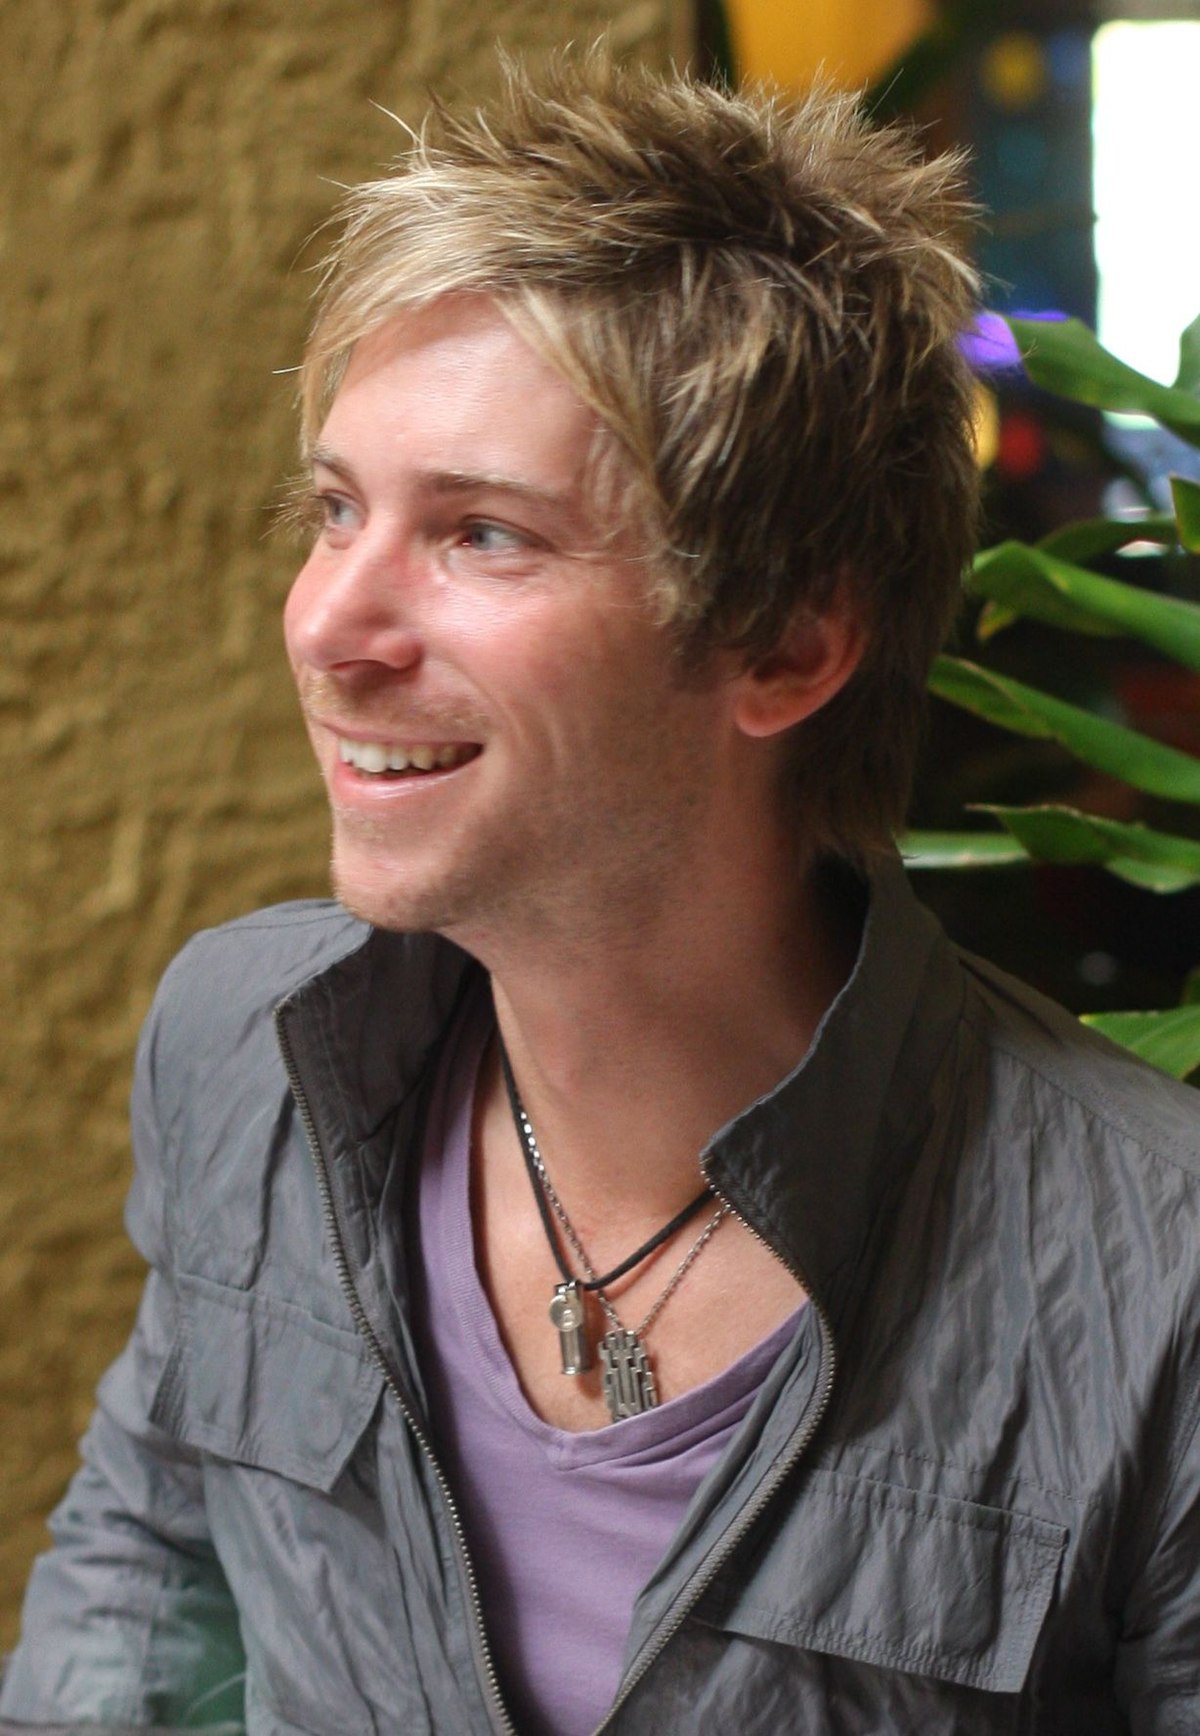 1200px-Troy_baker_taiyoucon_2011_cropped.jpg